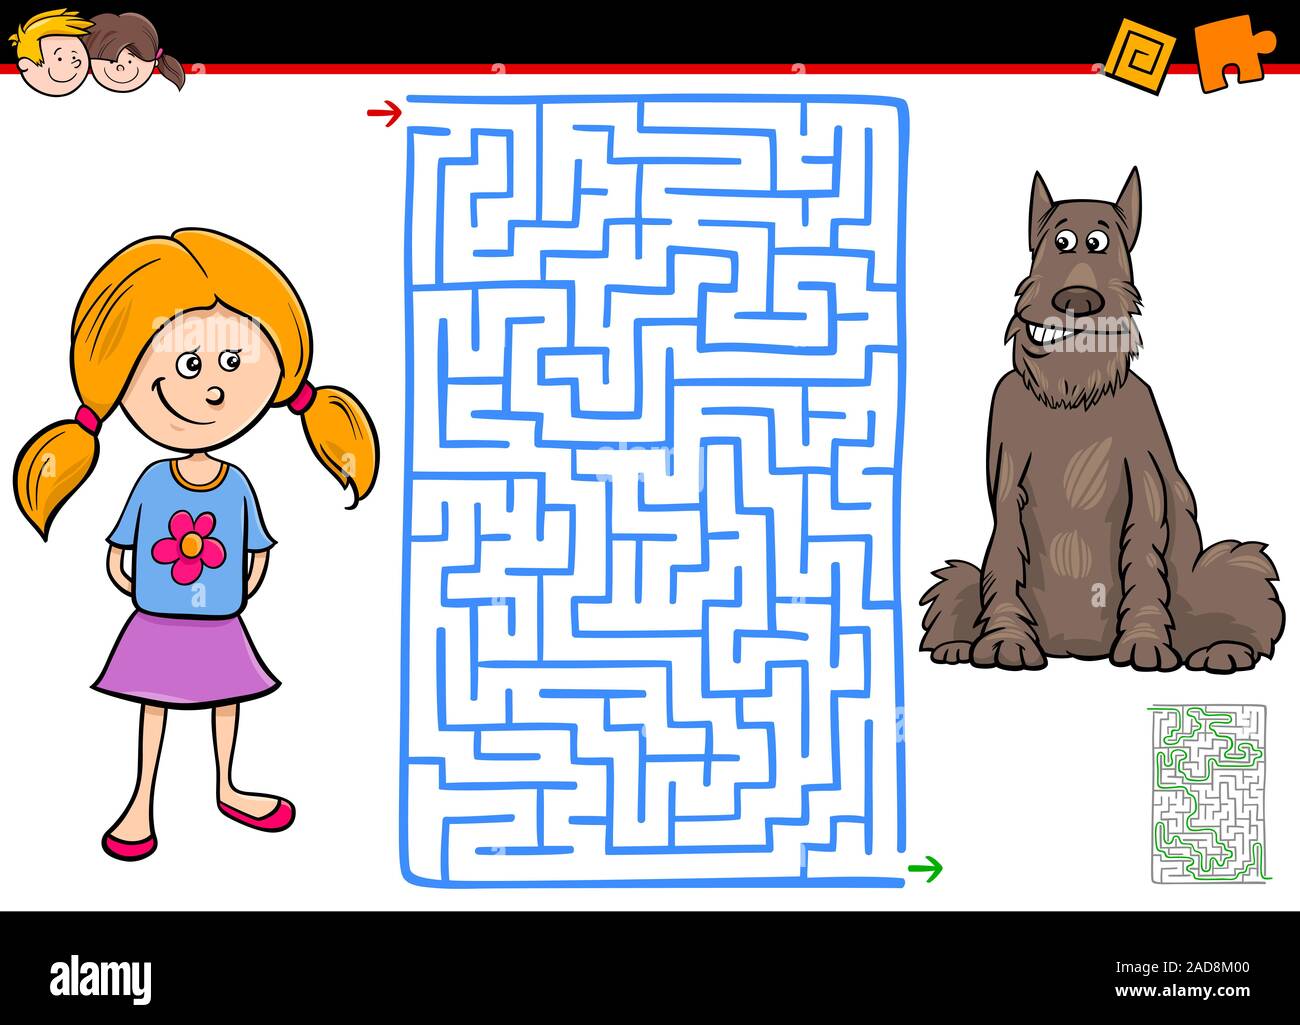 https://c8.alamy.com/comp/2AD8M00/maze-game-with-girl-and-her-pet-dog-2AD8M00.jpg